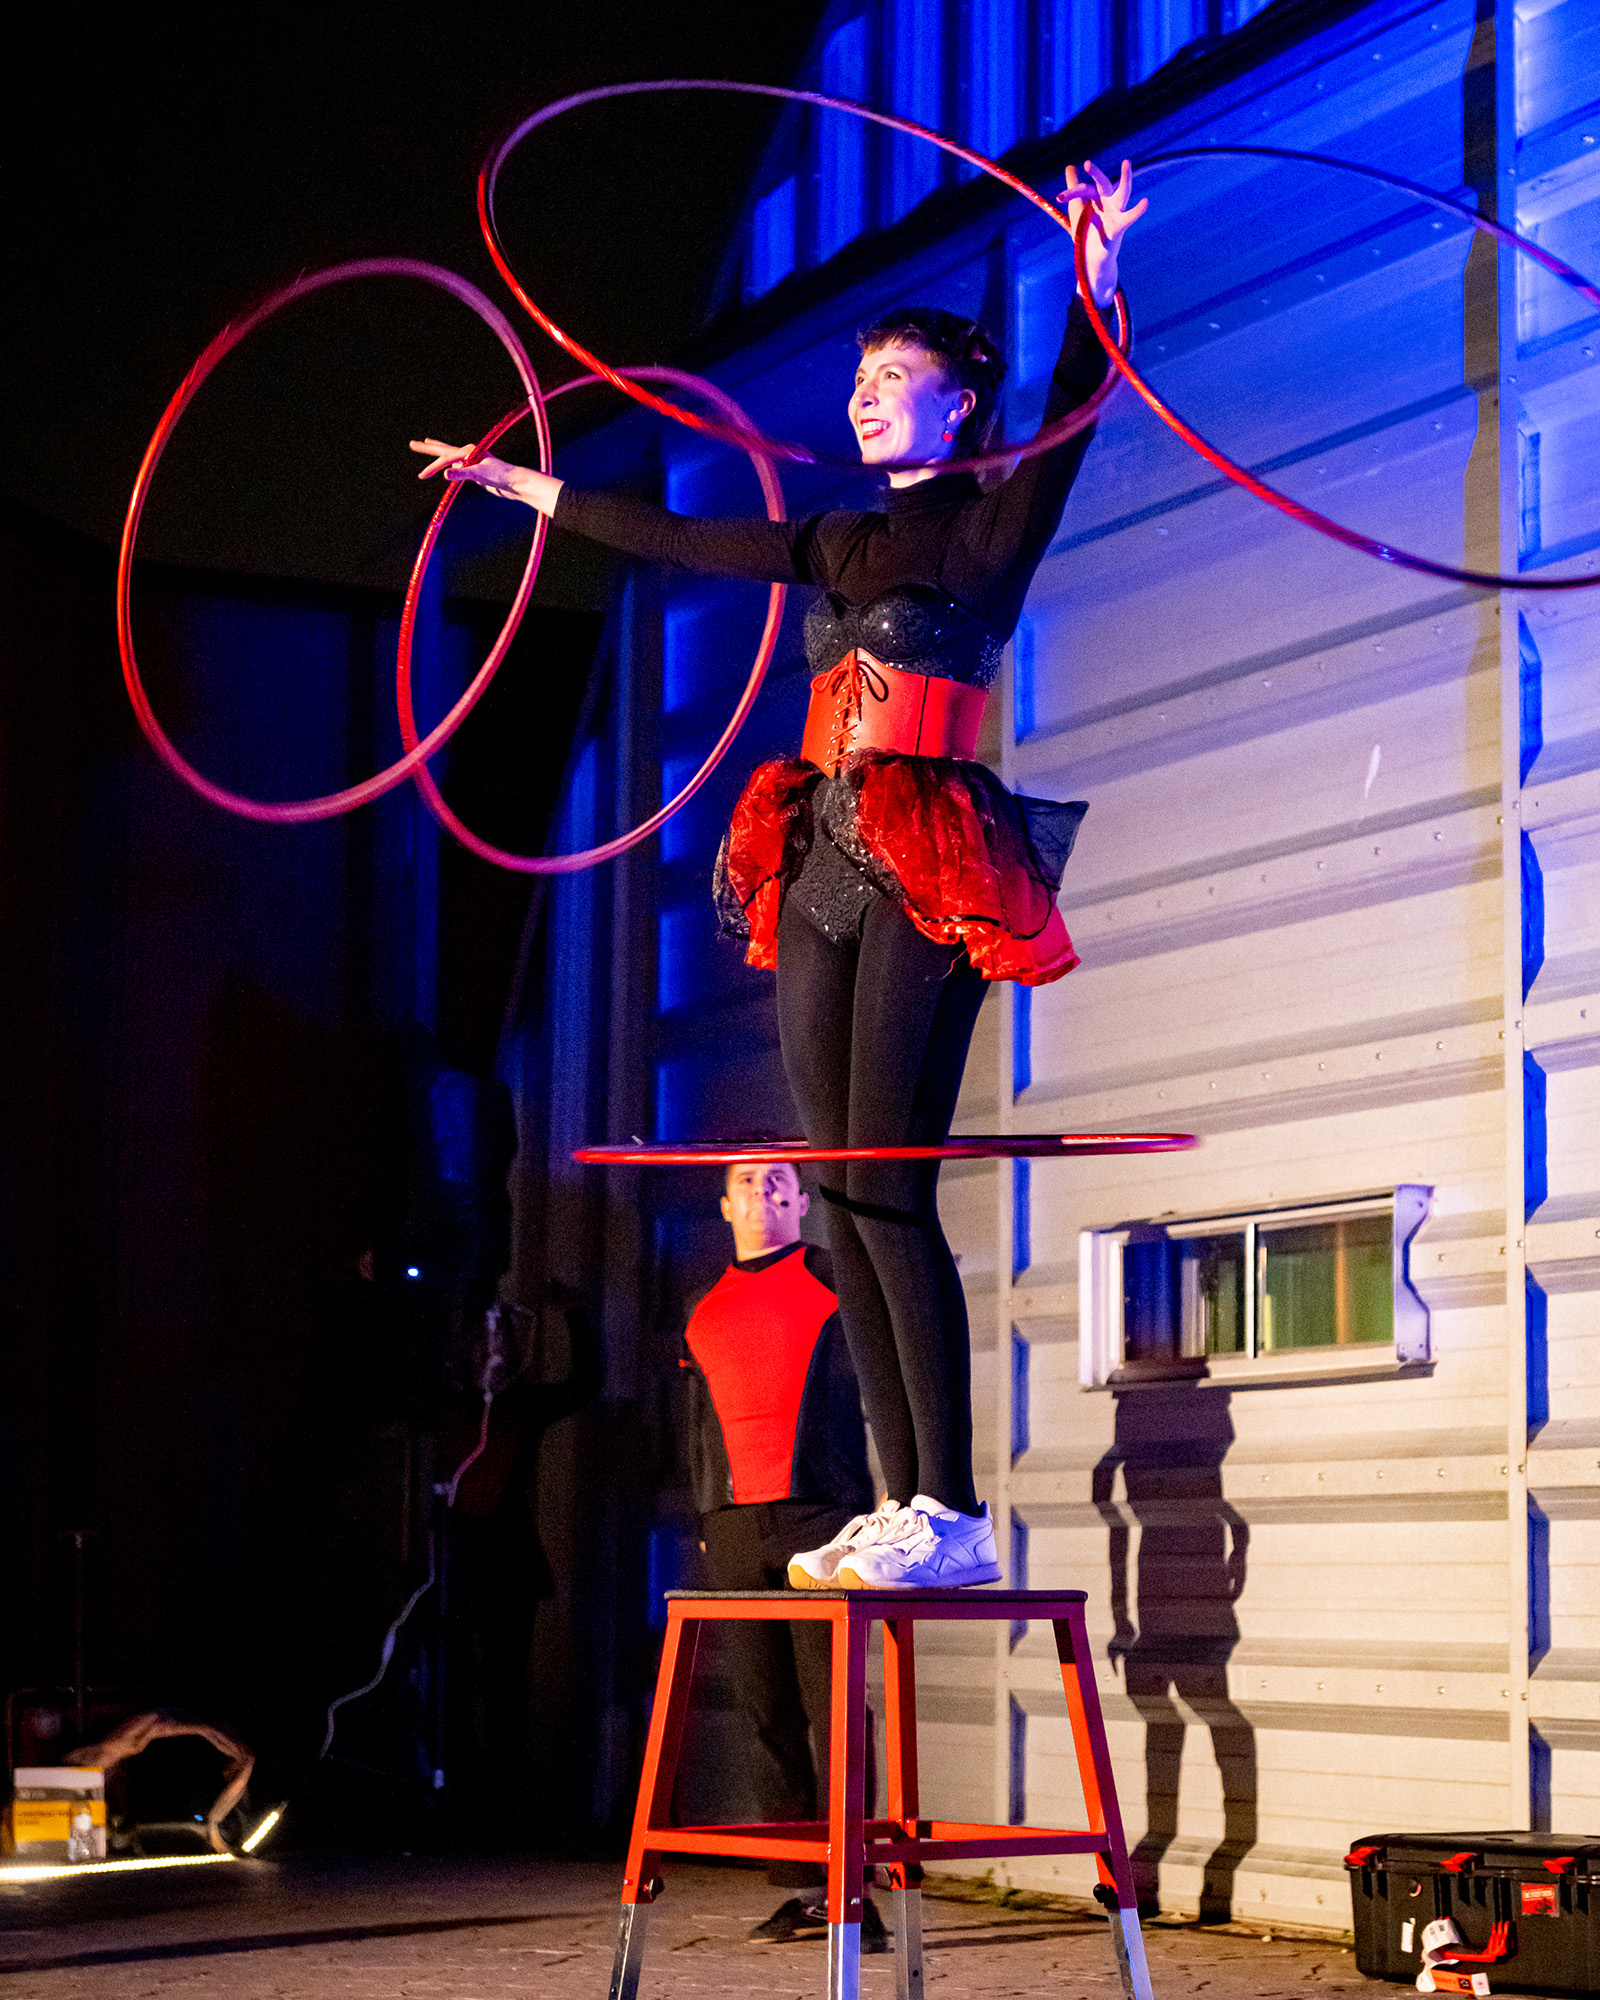 Hoop performer stands on a stool with several hoops over her head